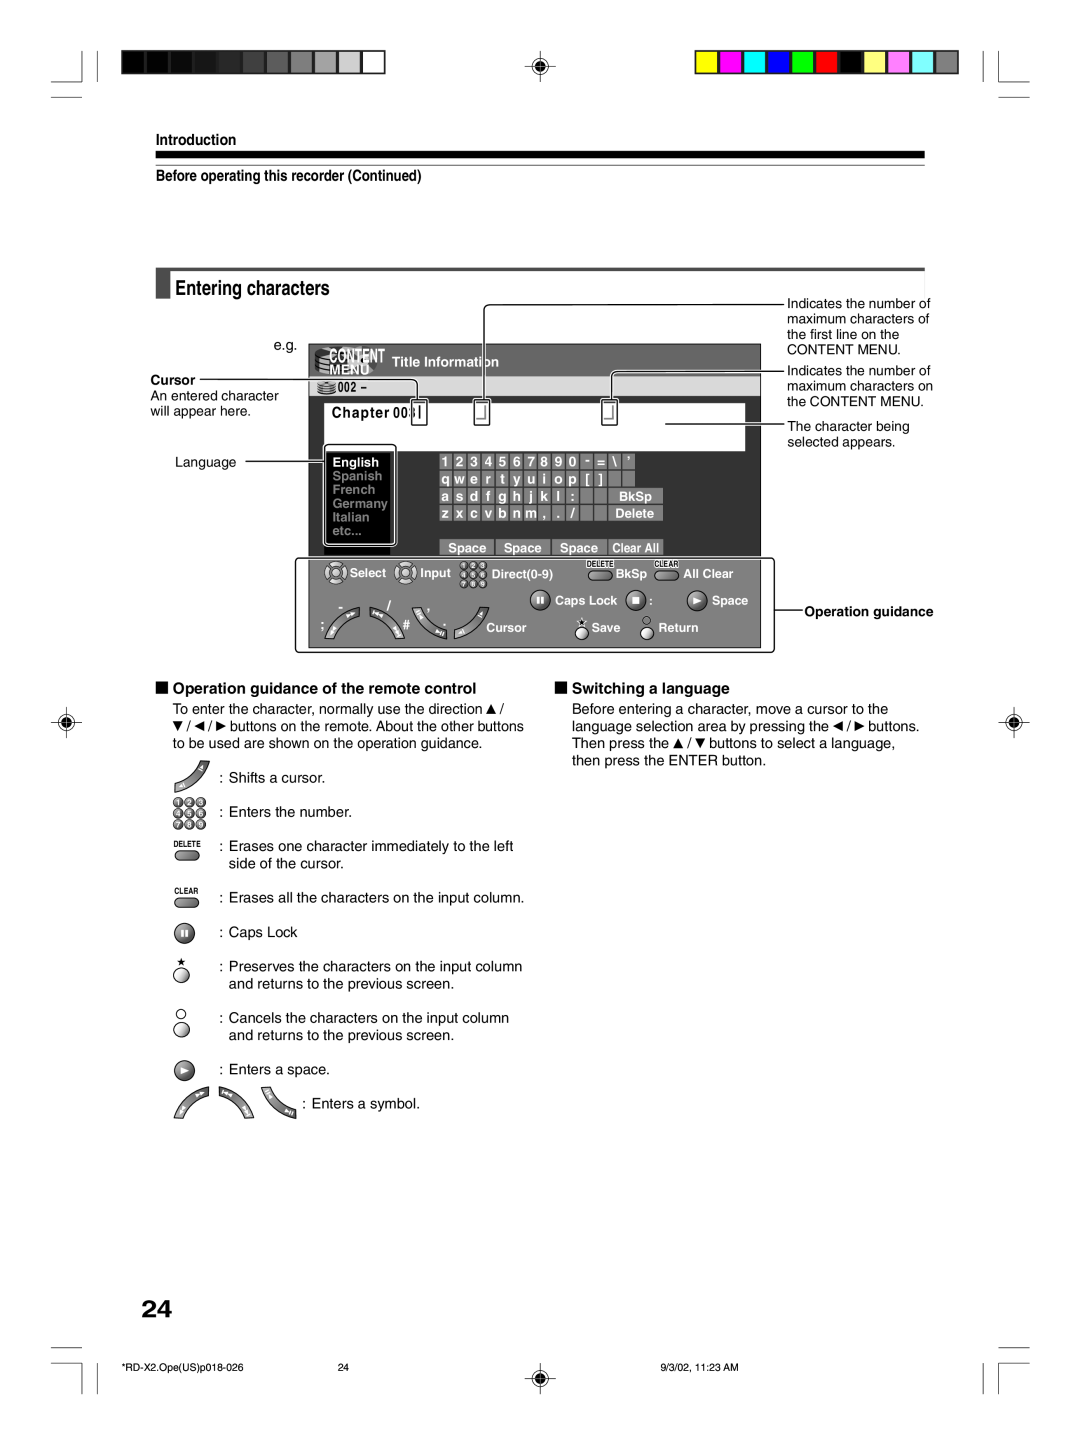 Toshiba RD-X2U Entering characters, Chapter, Operation guidance of the remote control, Switching a language, Introduction 